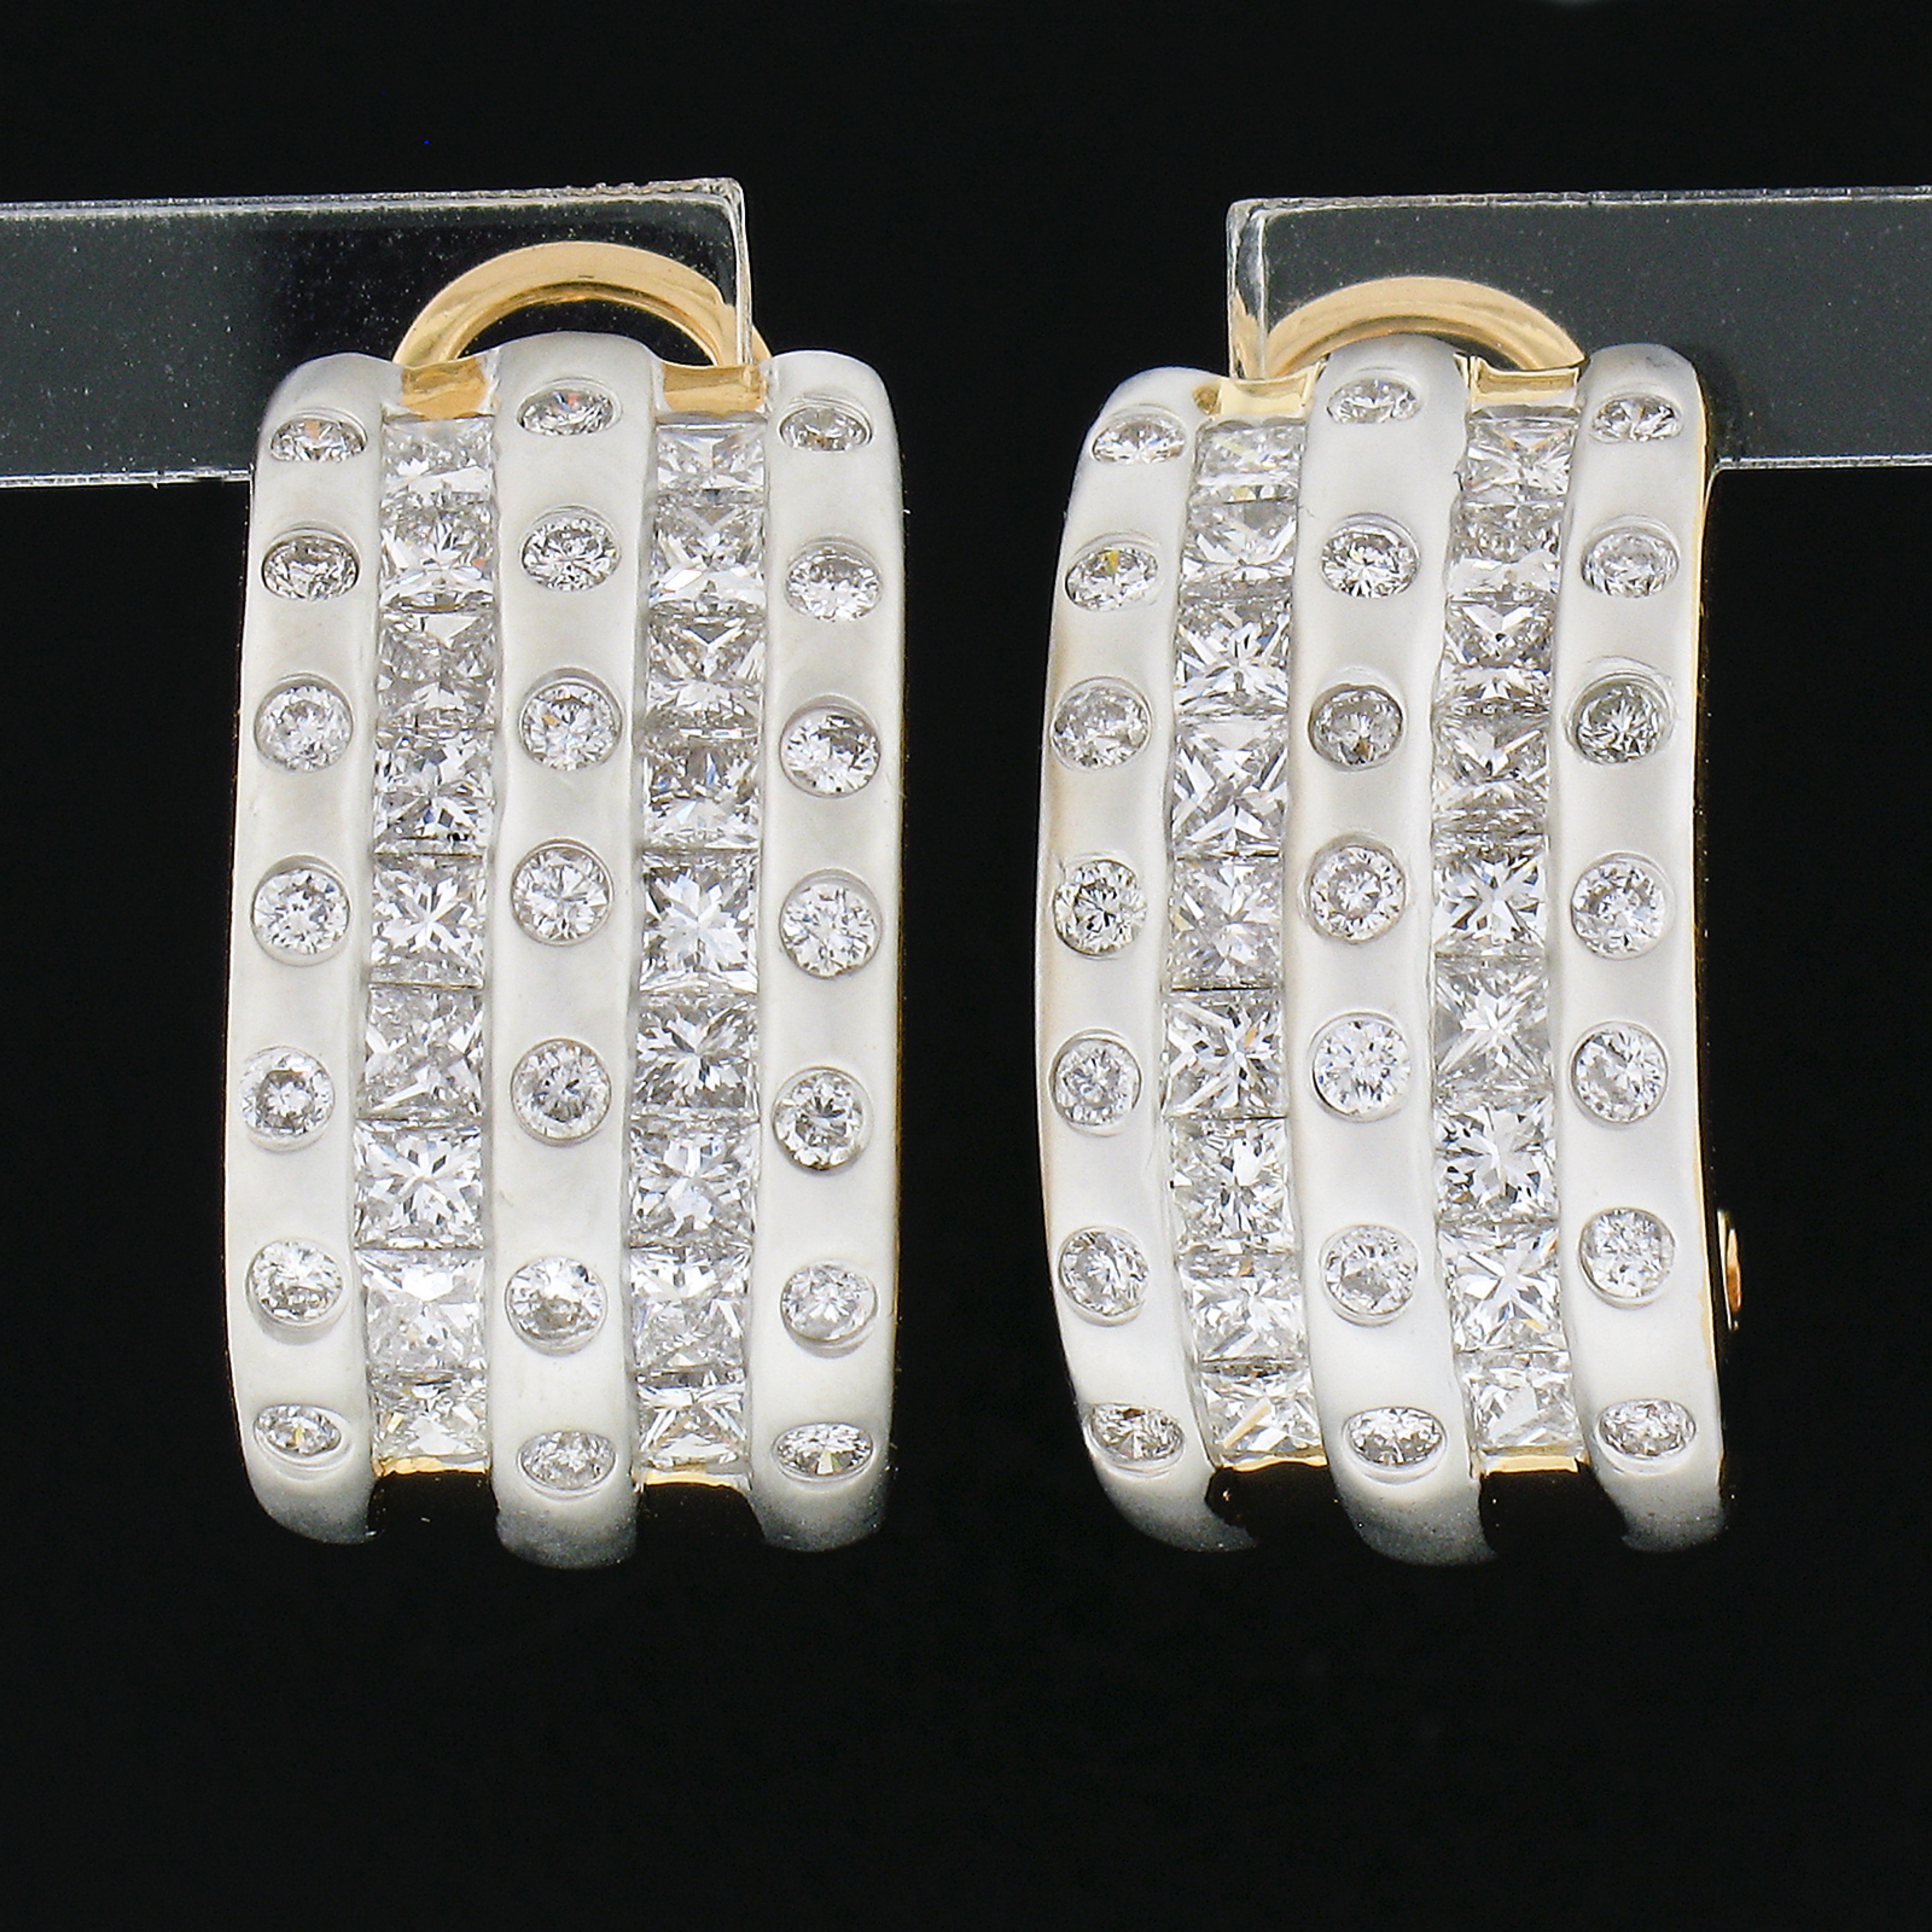 This most wonderful and super elegant pair of earrings are crafted in solid 18k yellow and white gold and features five rows of channel and burnish set diamonds throughout across the wide front. Both princess cuts and round brilliant cut diamonds